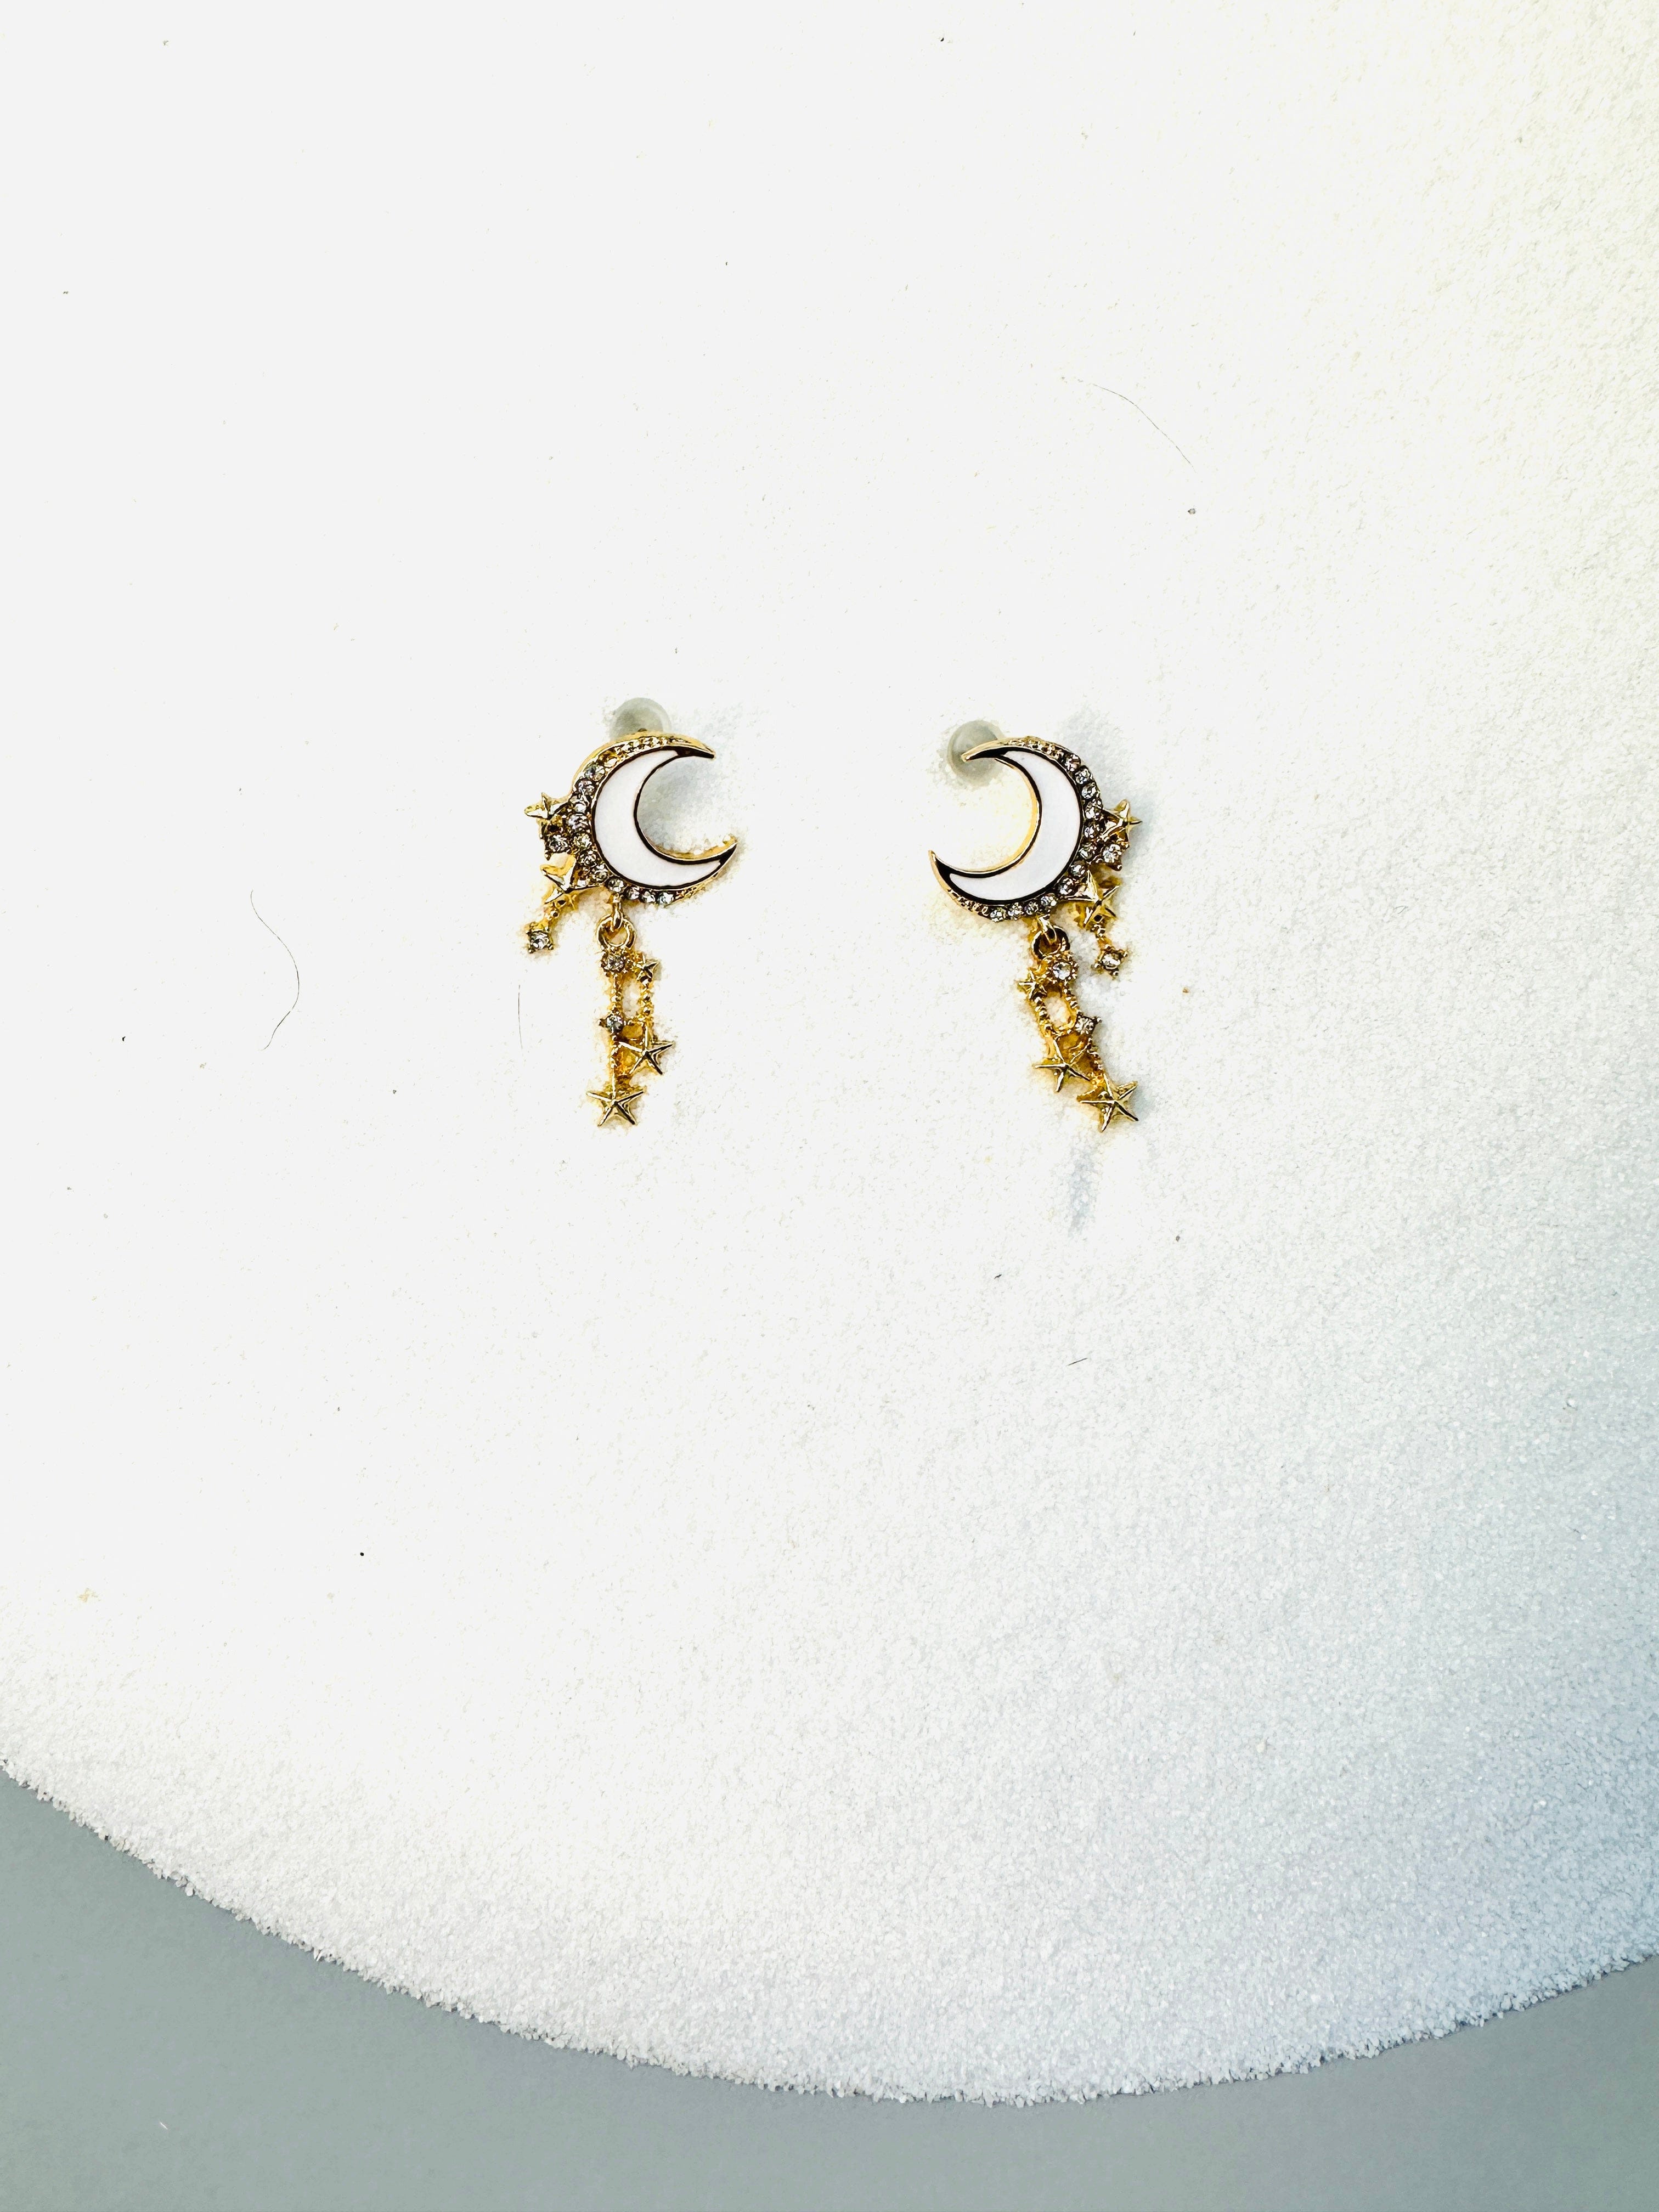 Celestial Mood poxy Earring Studs with Cubic Zirconia Stones - Perception0one.com